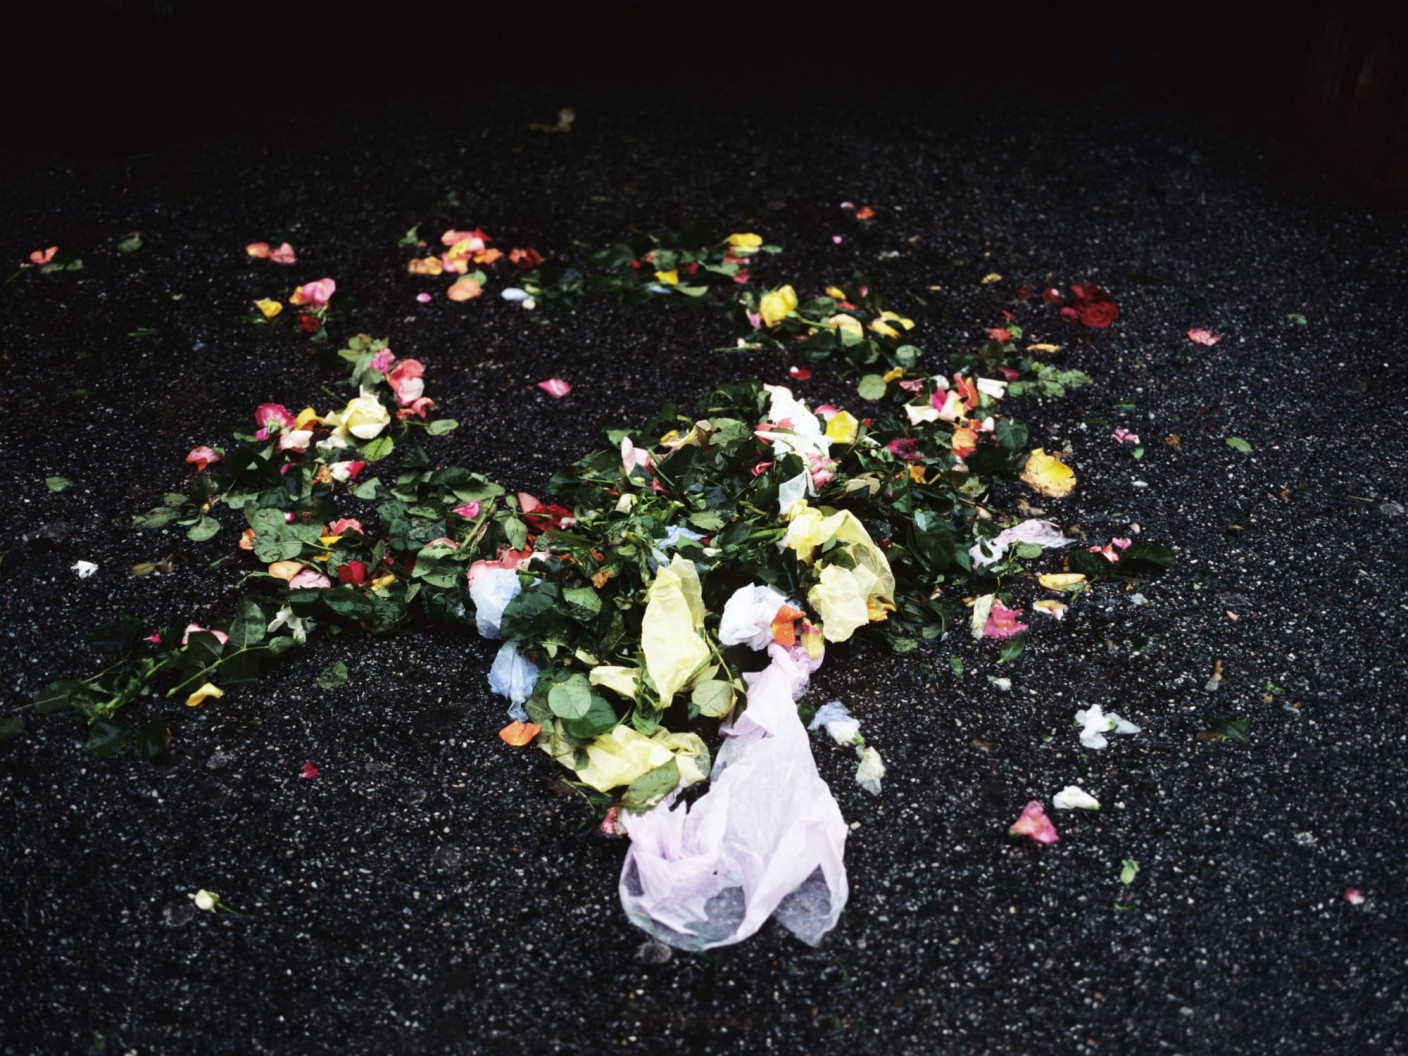 Discarded flower petals and a small plastic bag on asphalt paving